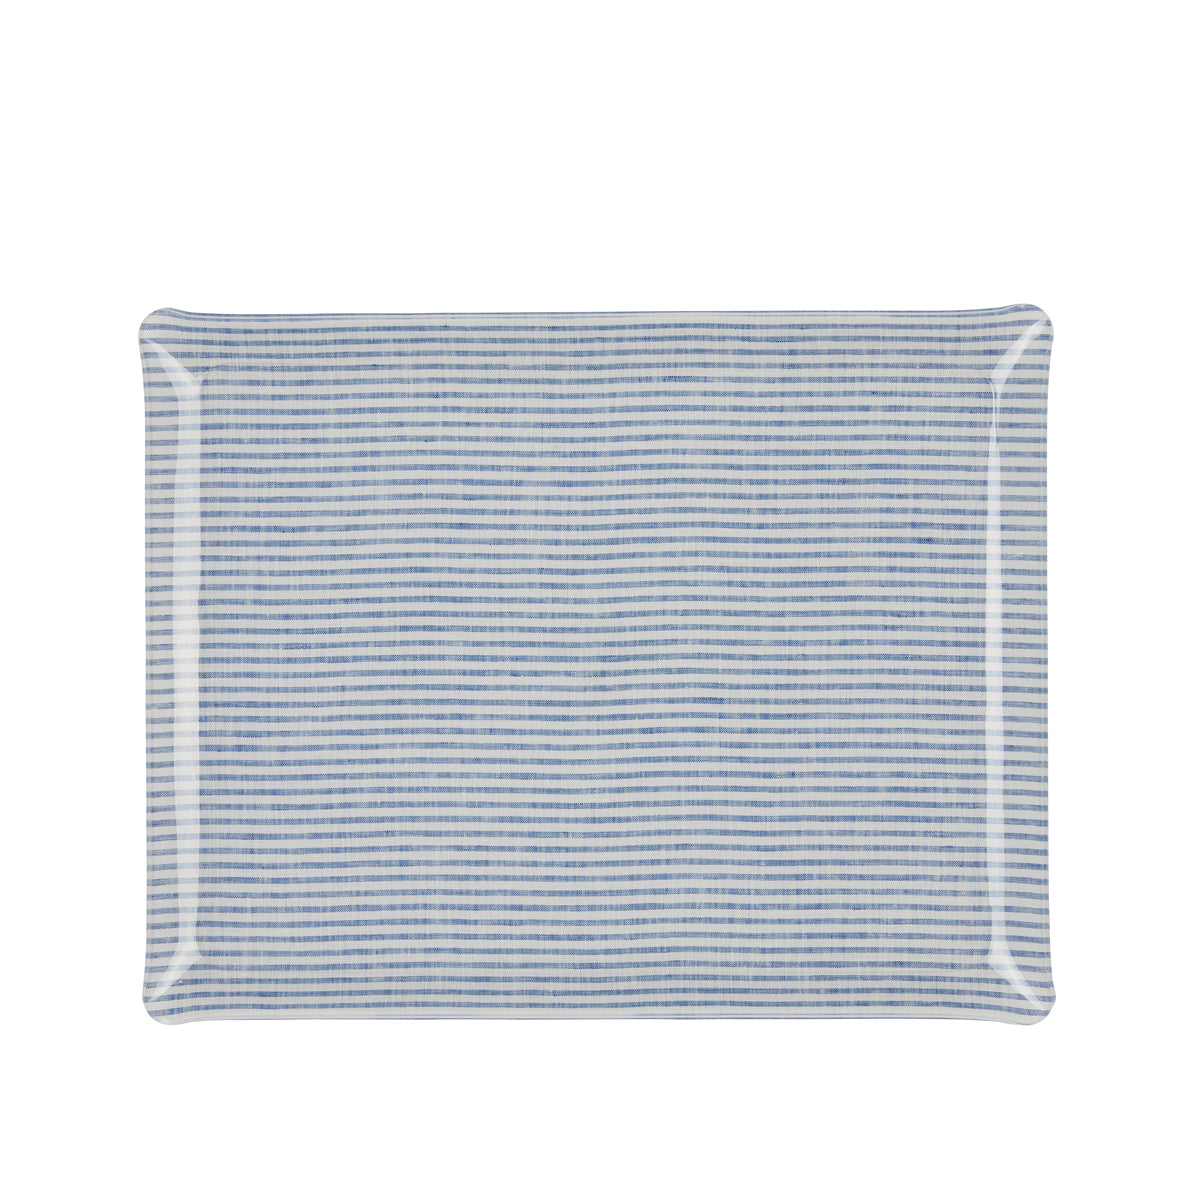 Nina Campbell Fabric Tray Large - Stripe Blue and White